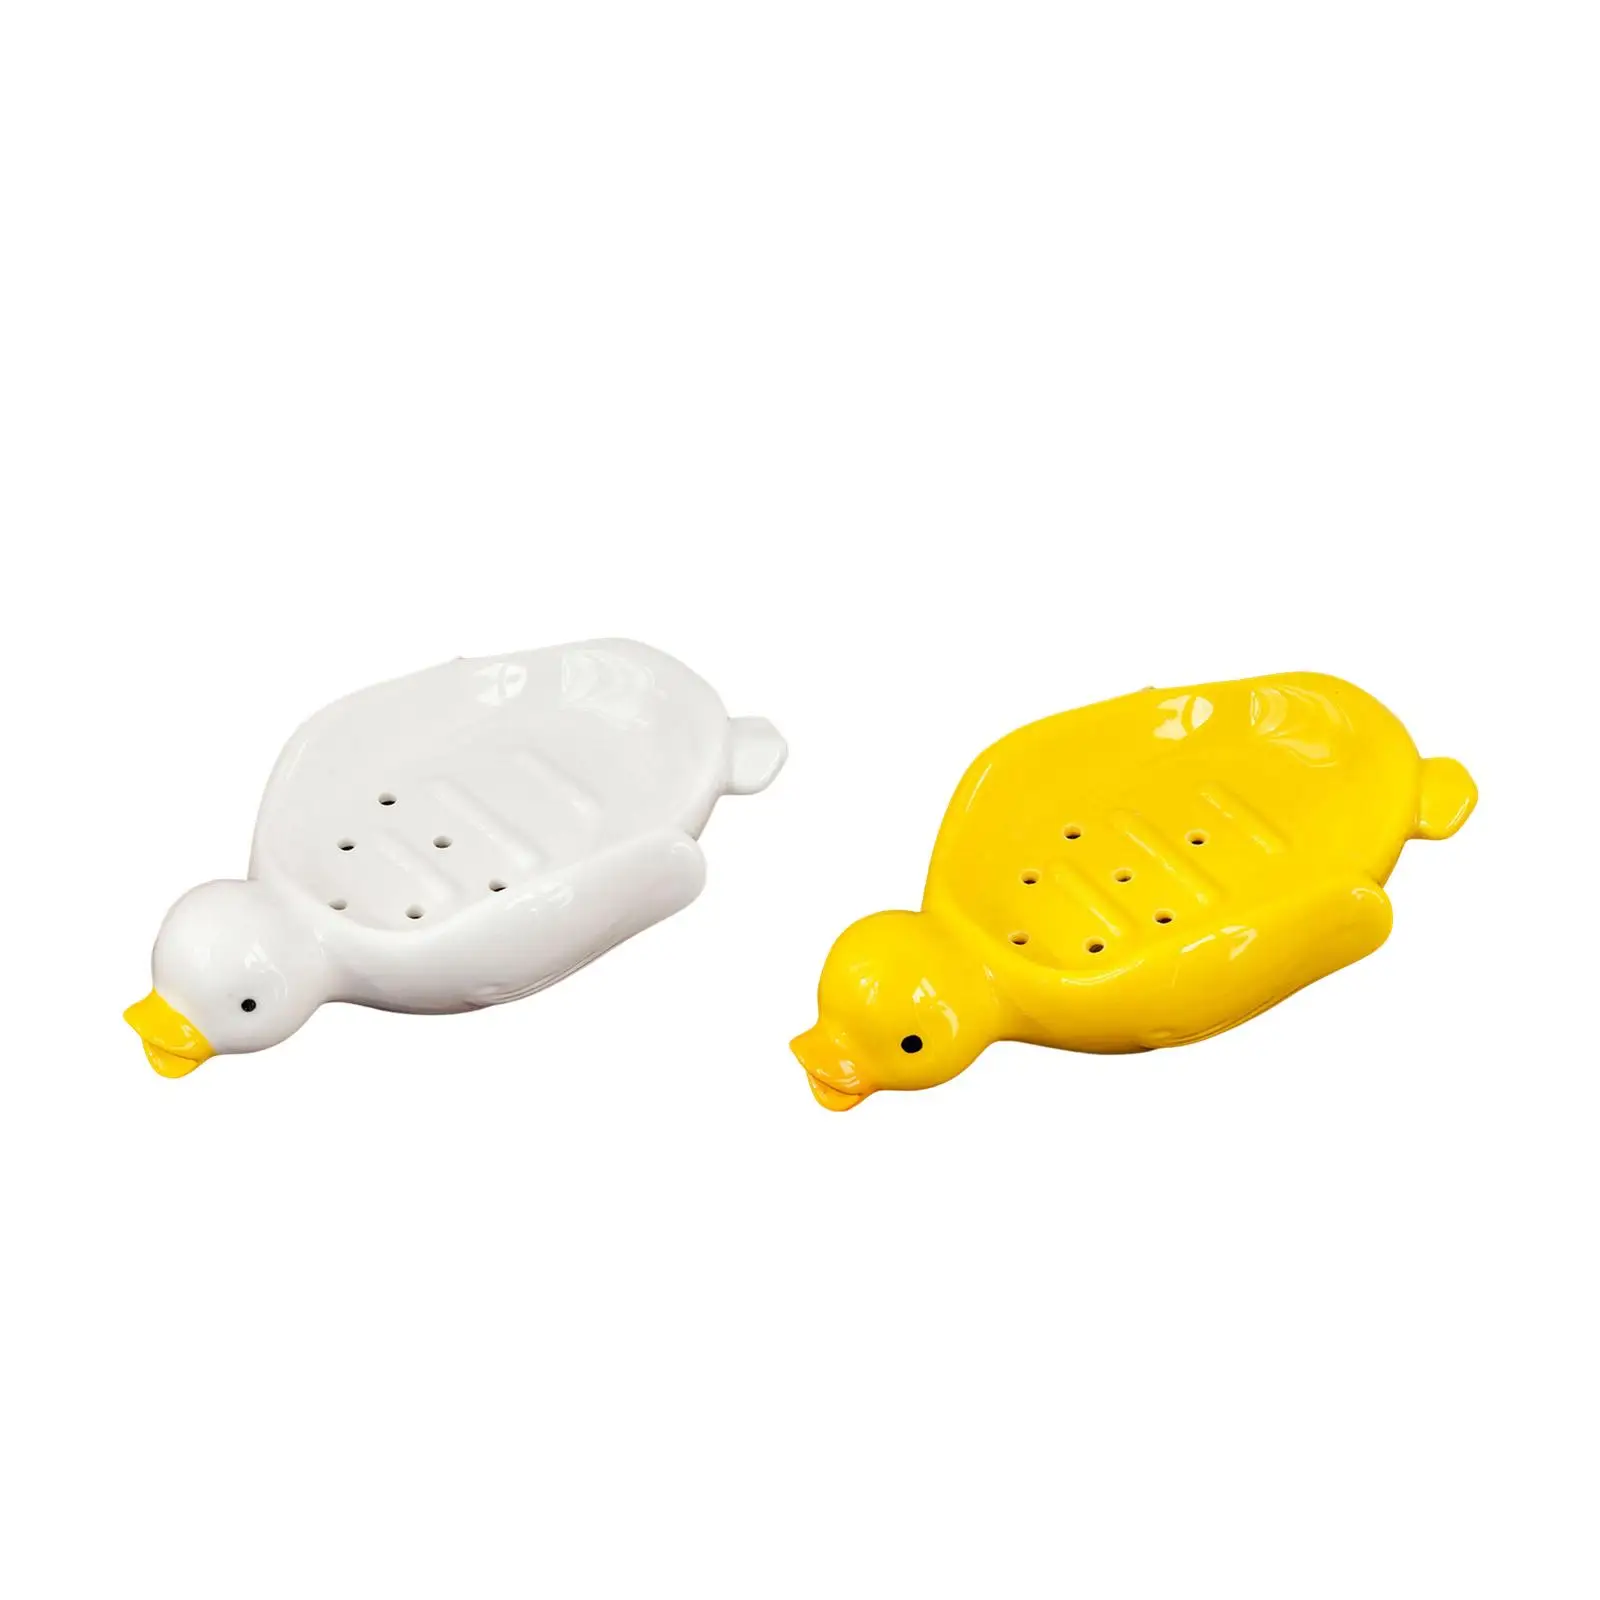 

Cute Soap Dish Decorative Adorable with Draining Holes Storage Rack Multipurpose Container Duck Soap Dishes for Dormitory Office